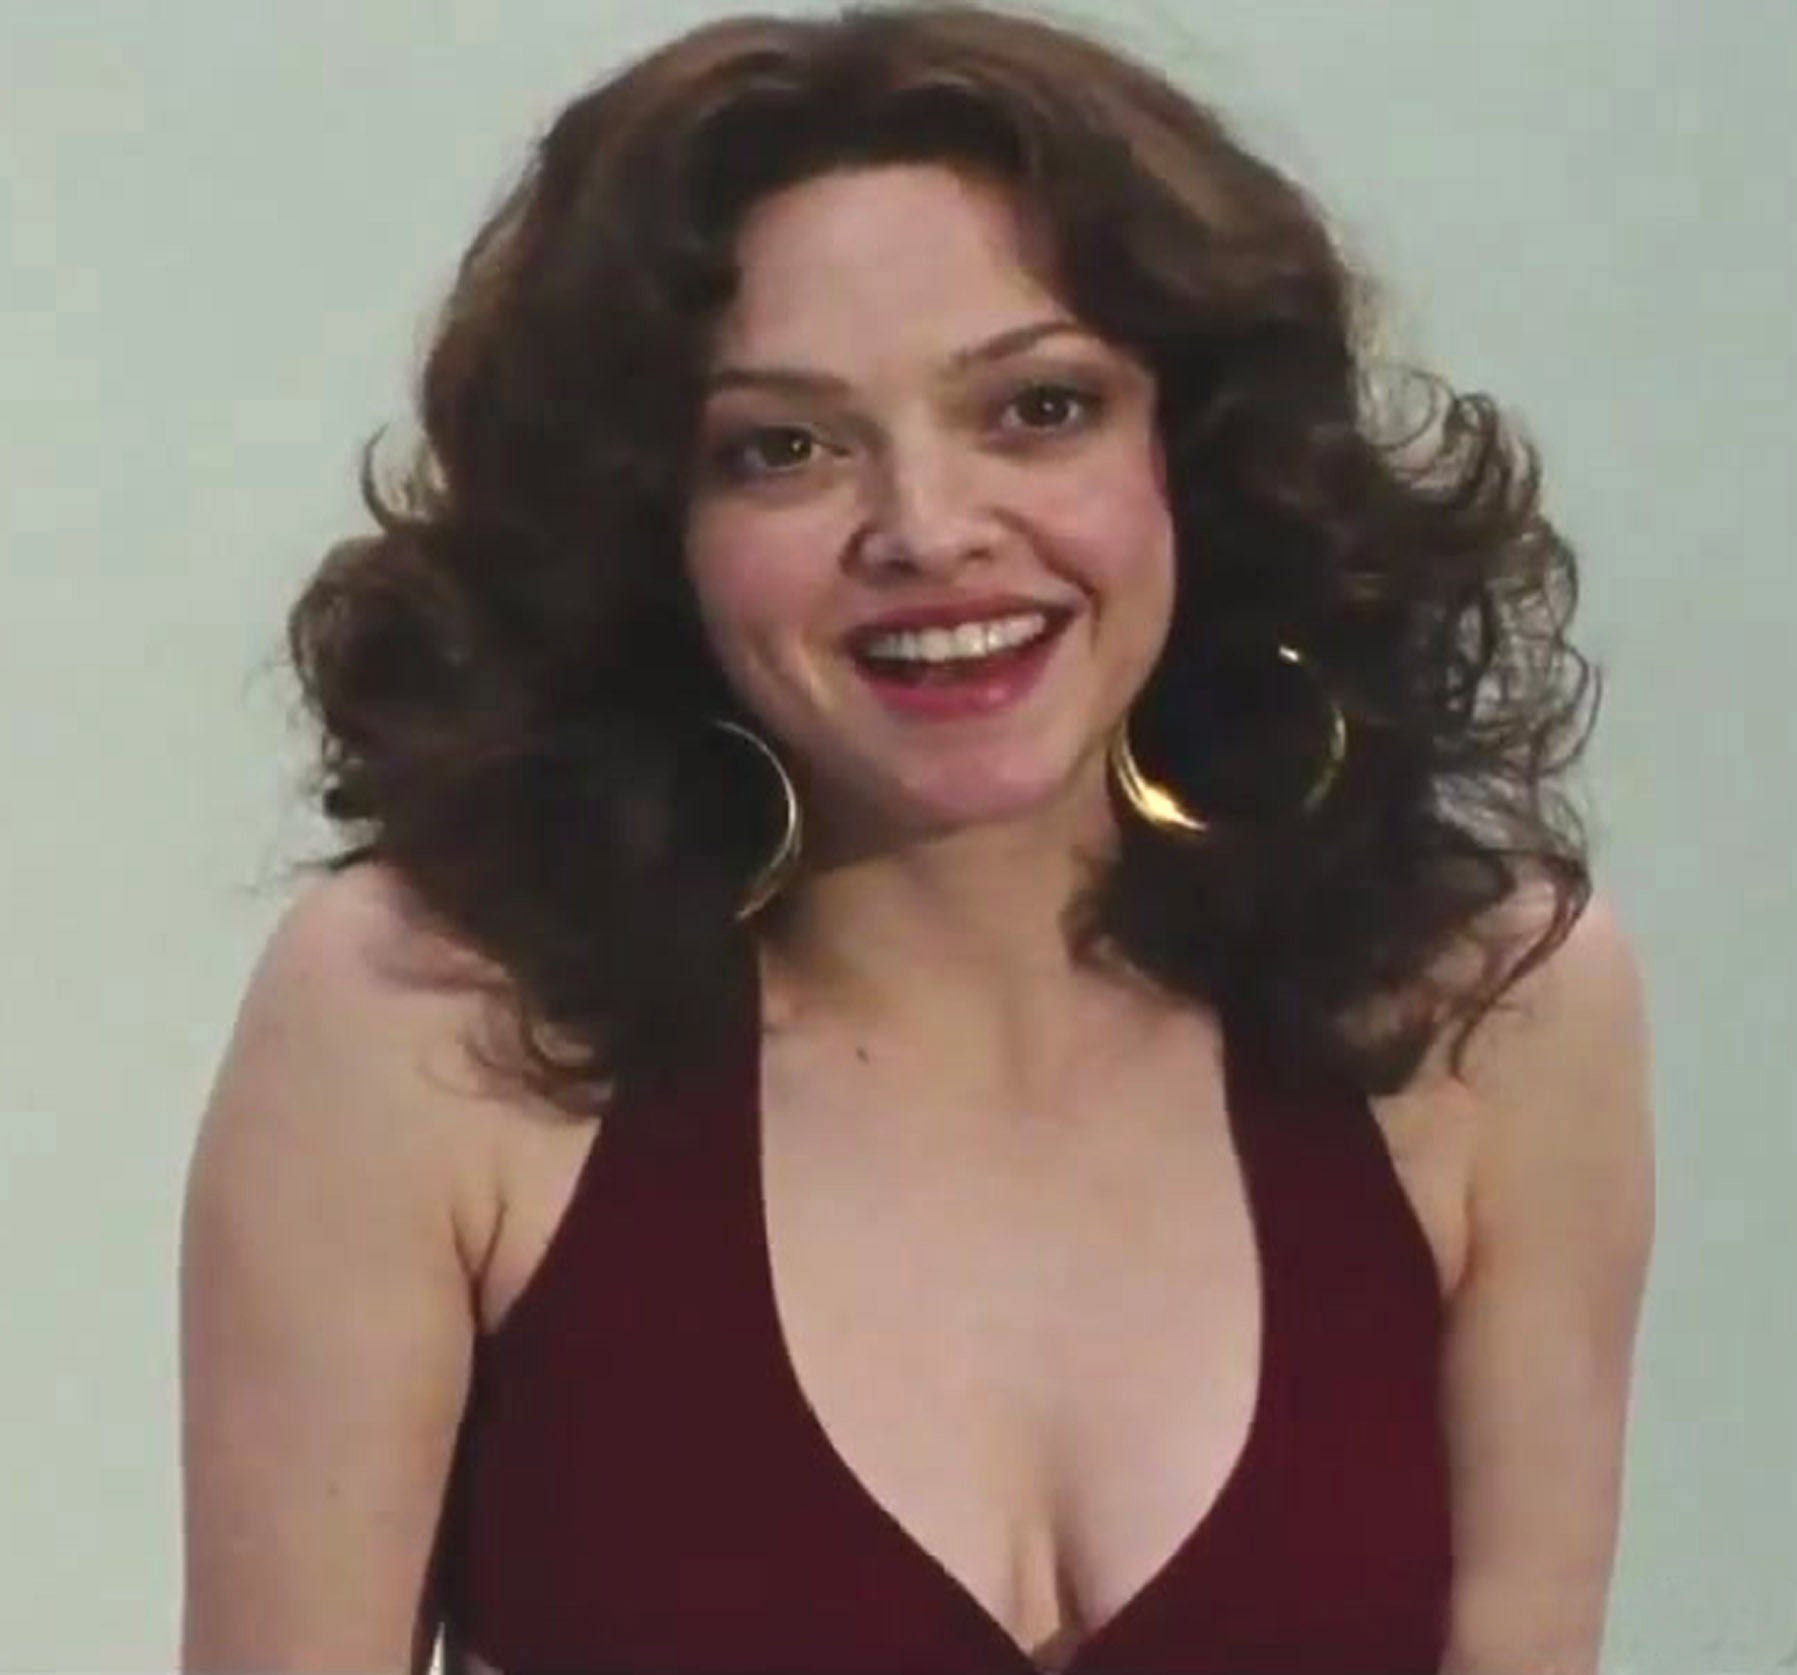 Vintage Porn Linda Lovelace Deep Throat - Berlin Film Festival review: Lovelace starring Amanda Seyfried as the  troubled Deep Throat star | The Independent | The Independent